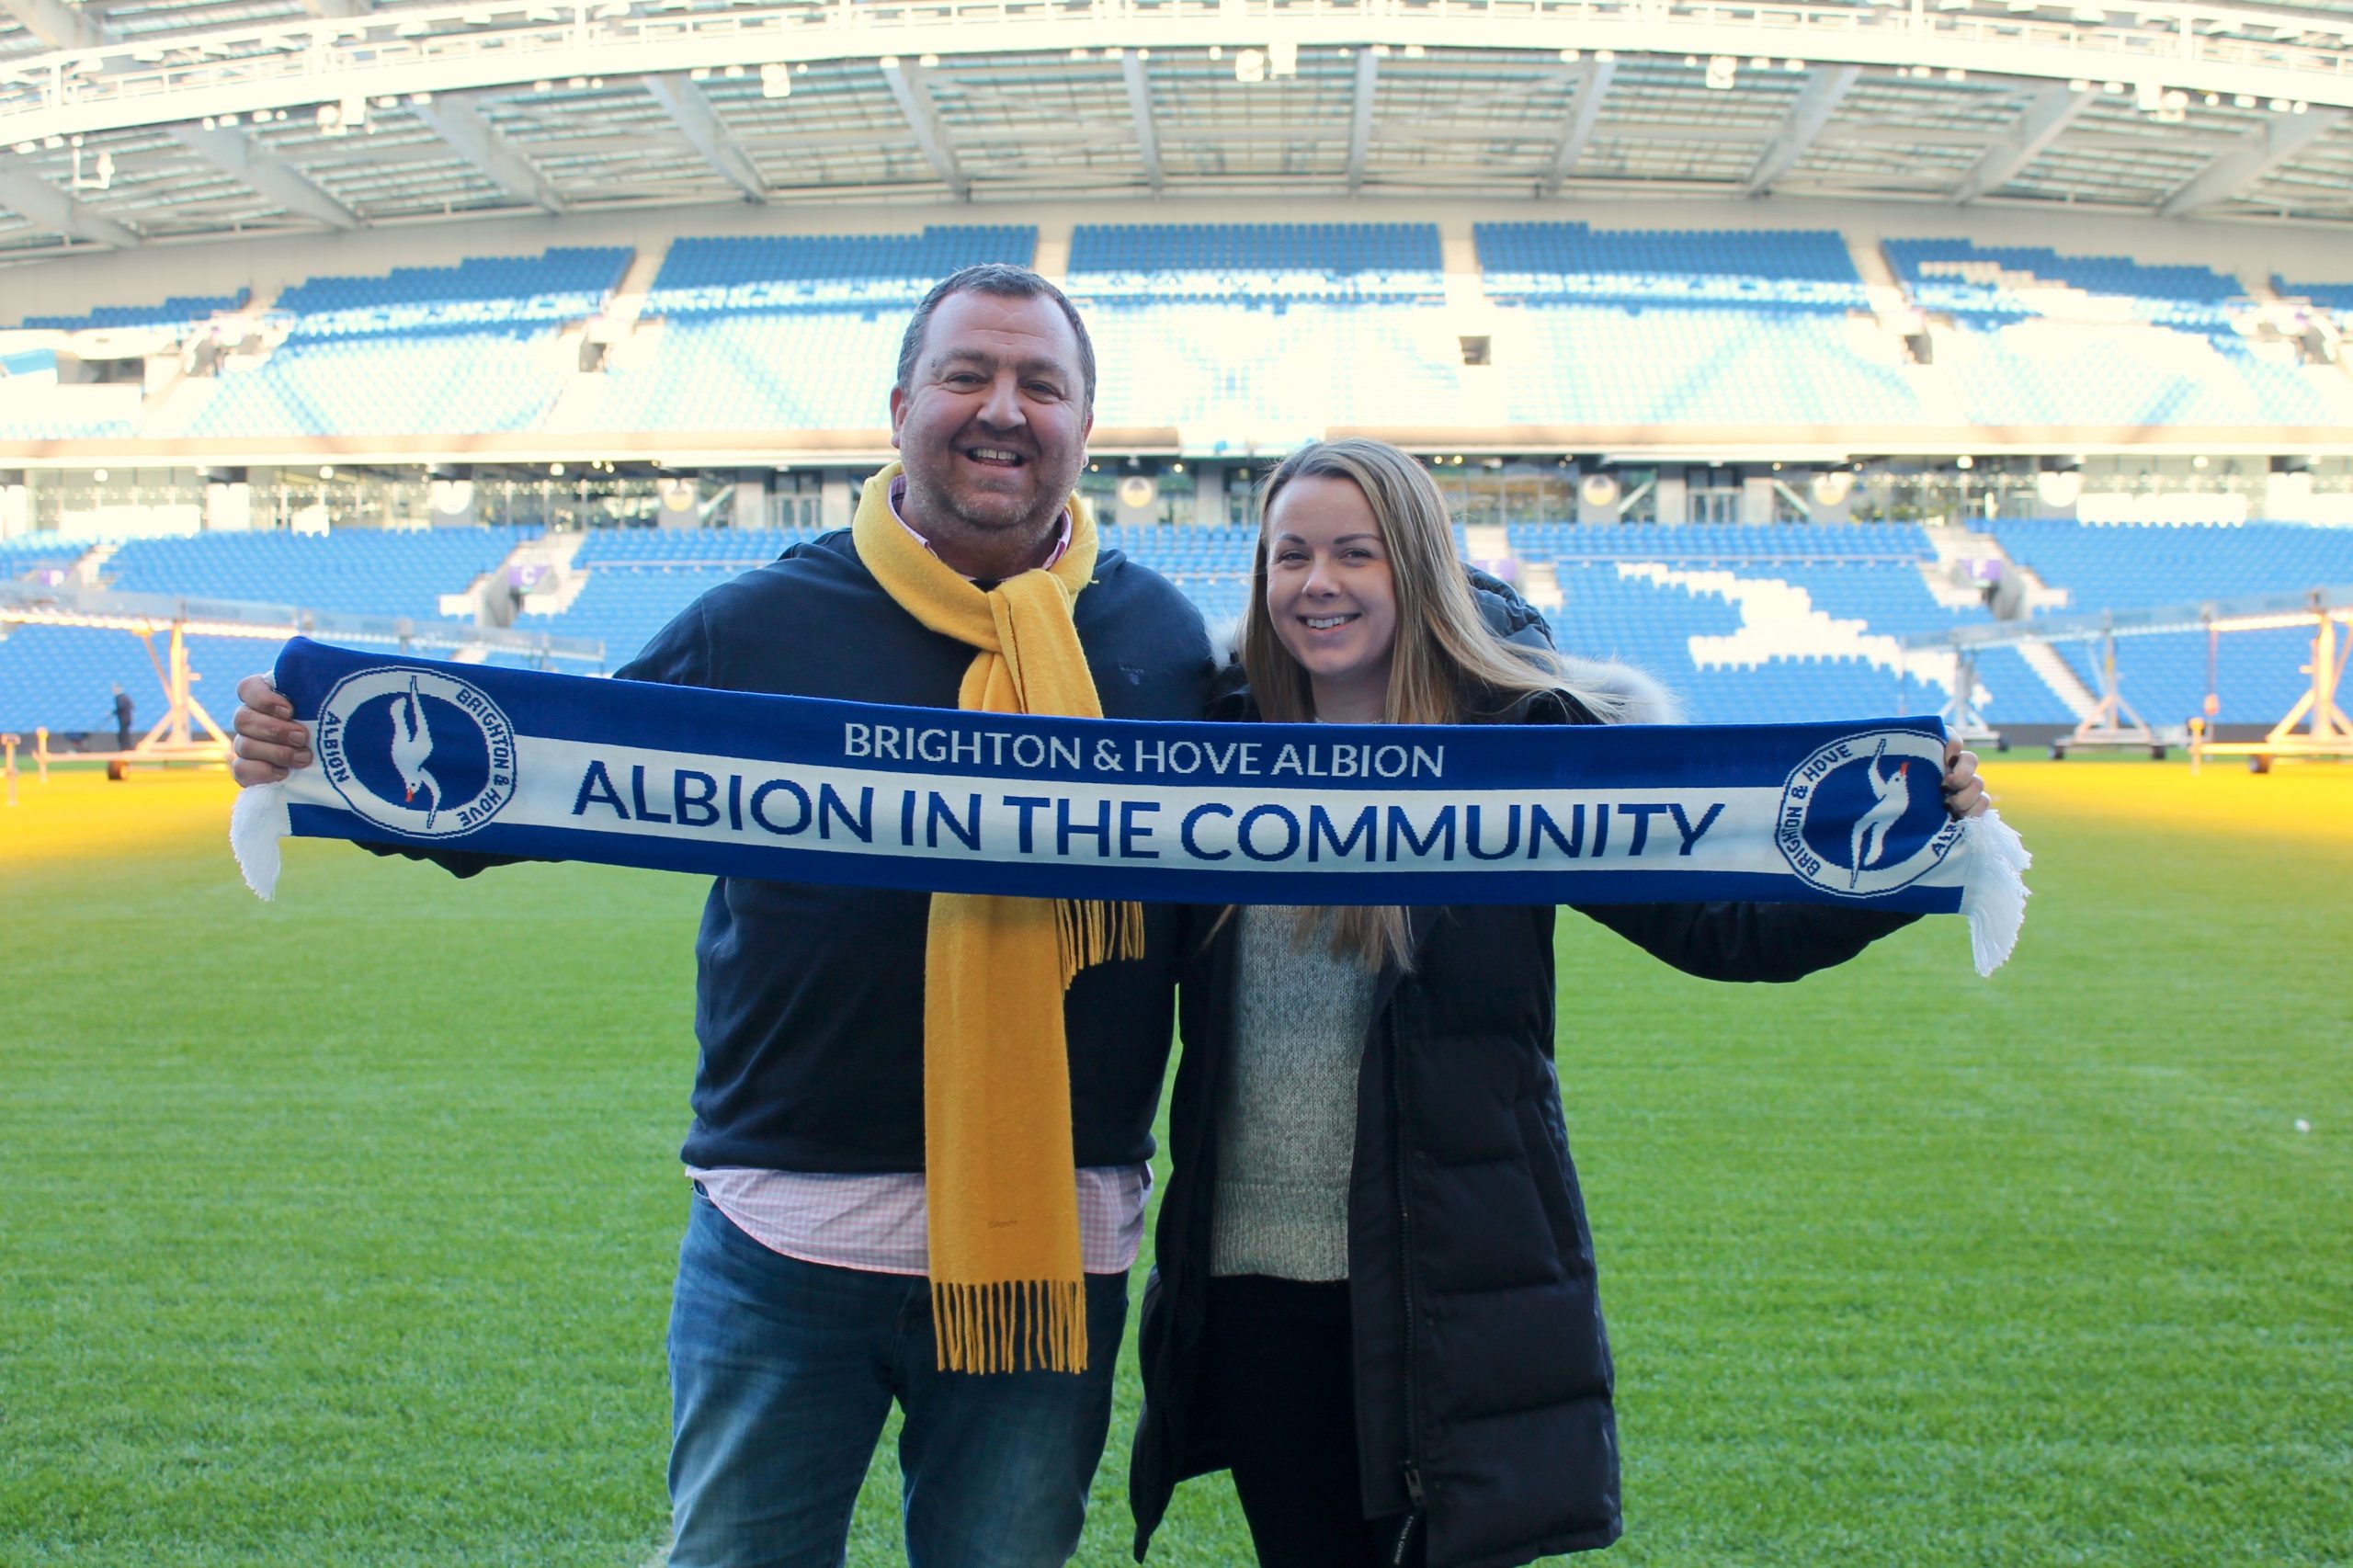 The Bull donates £5,000 to Albion in the Community